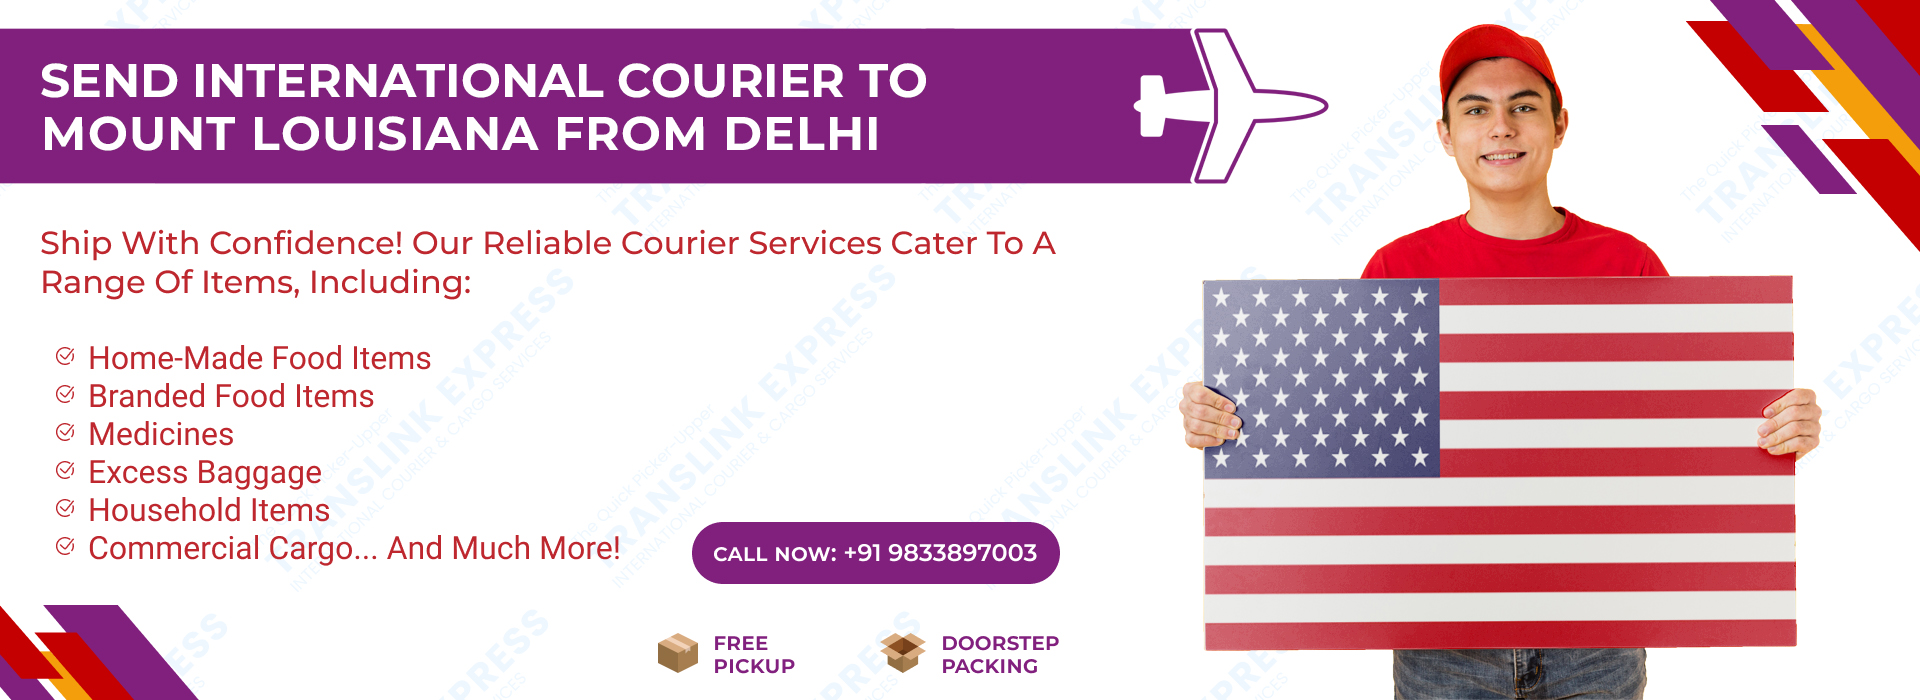 Courier to Mount Louisiana From Delhi